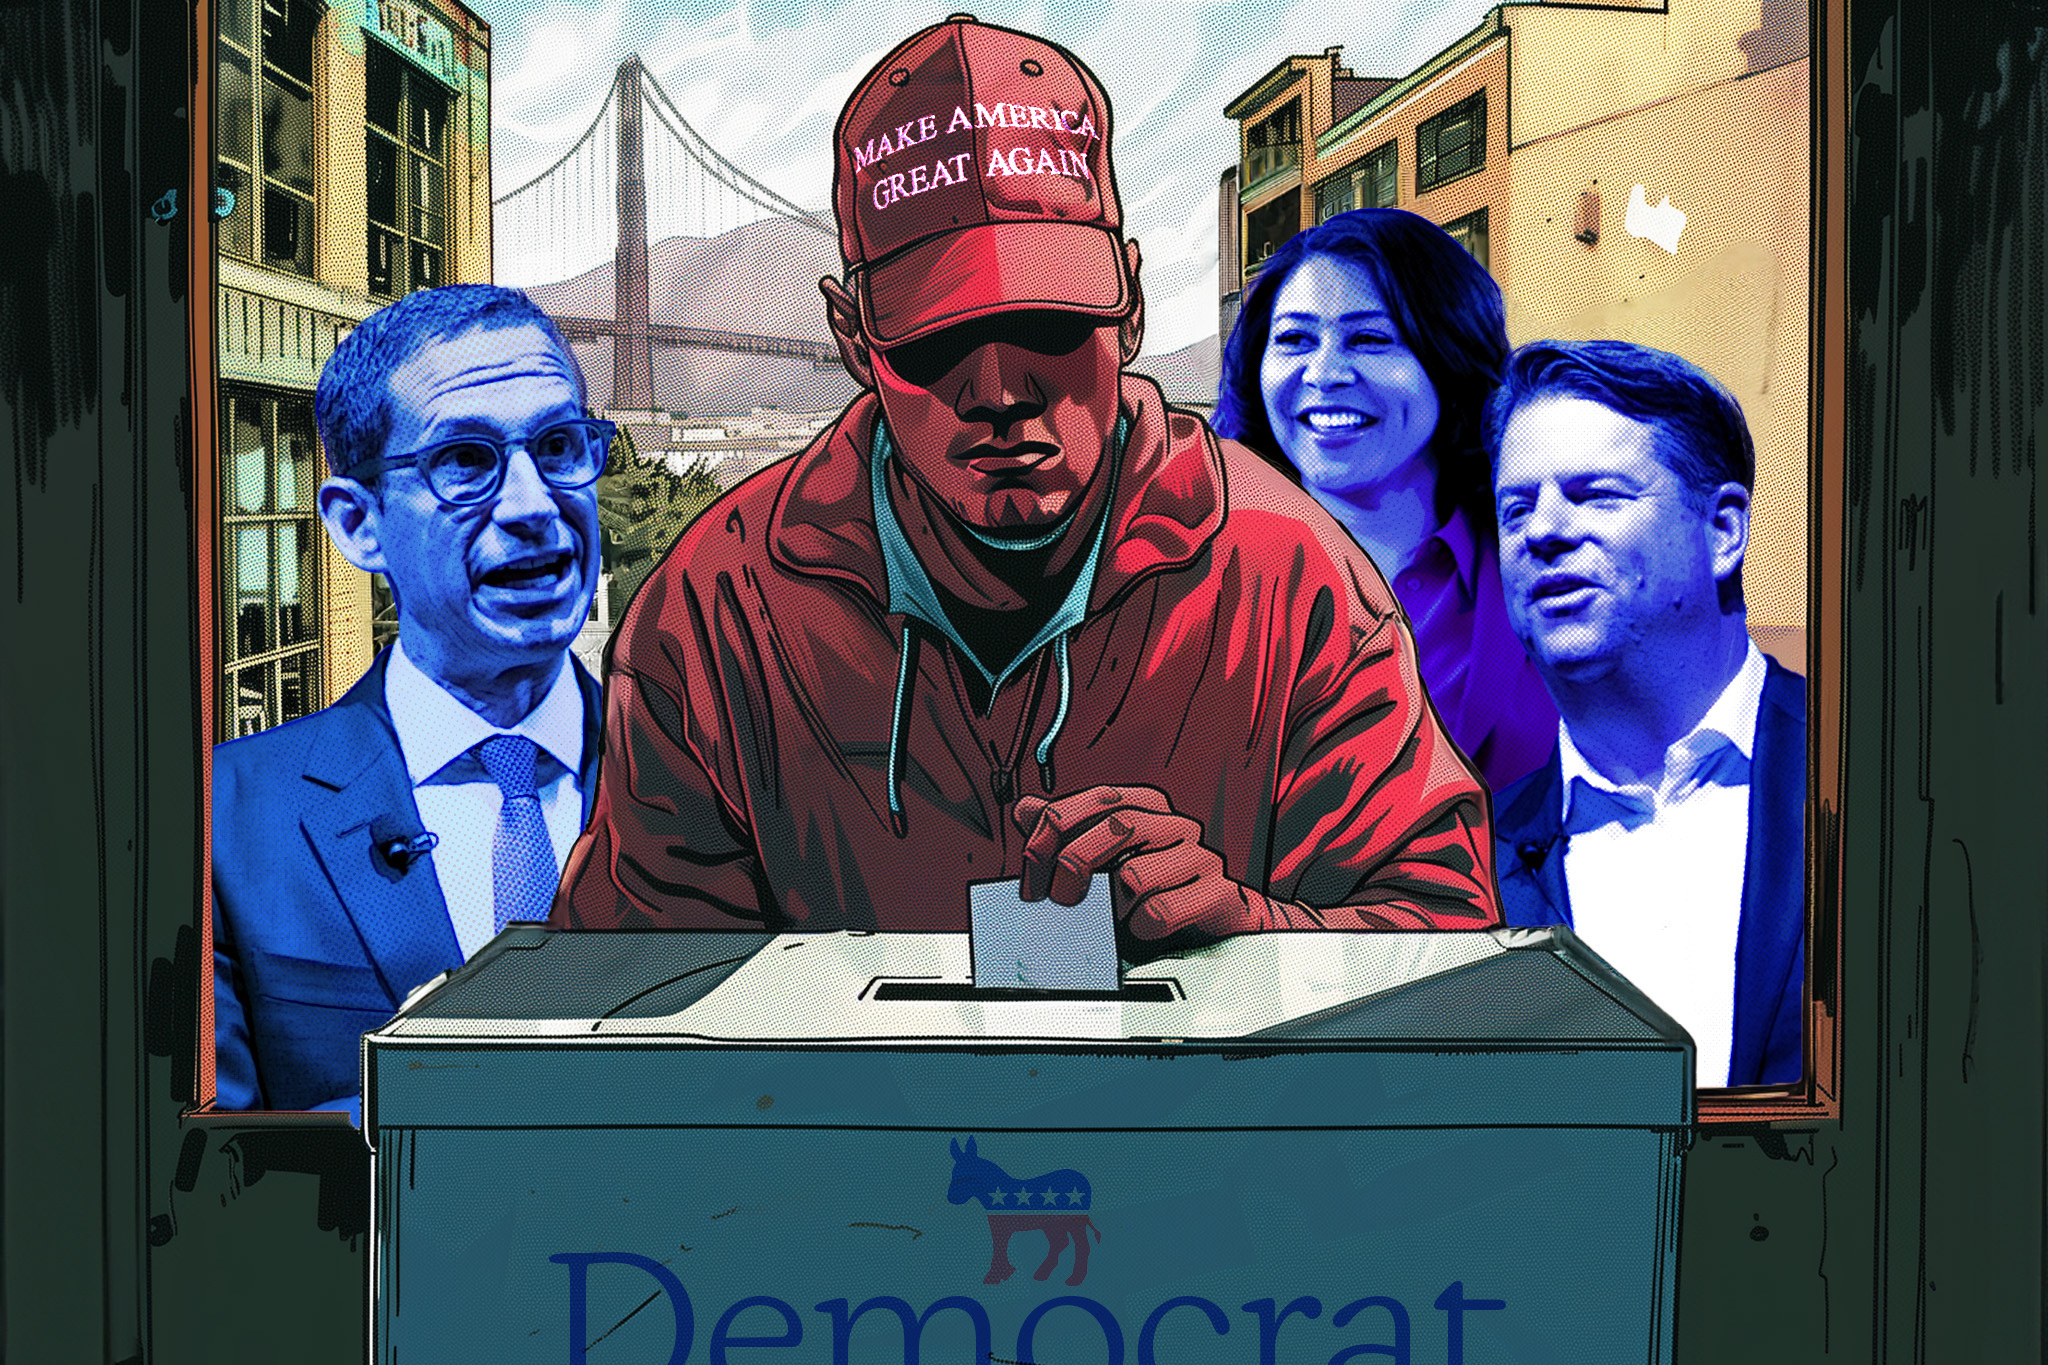 The image shows a person in a red "Make America Great Again" hat casting a ballot into a box labeled "Democrat." Three people, colored in blue, stand in the background.